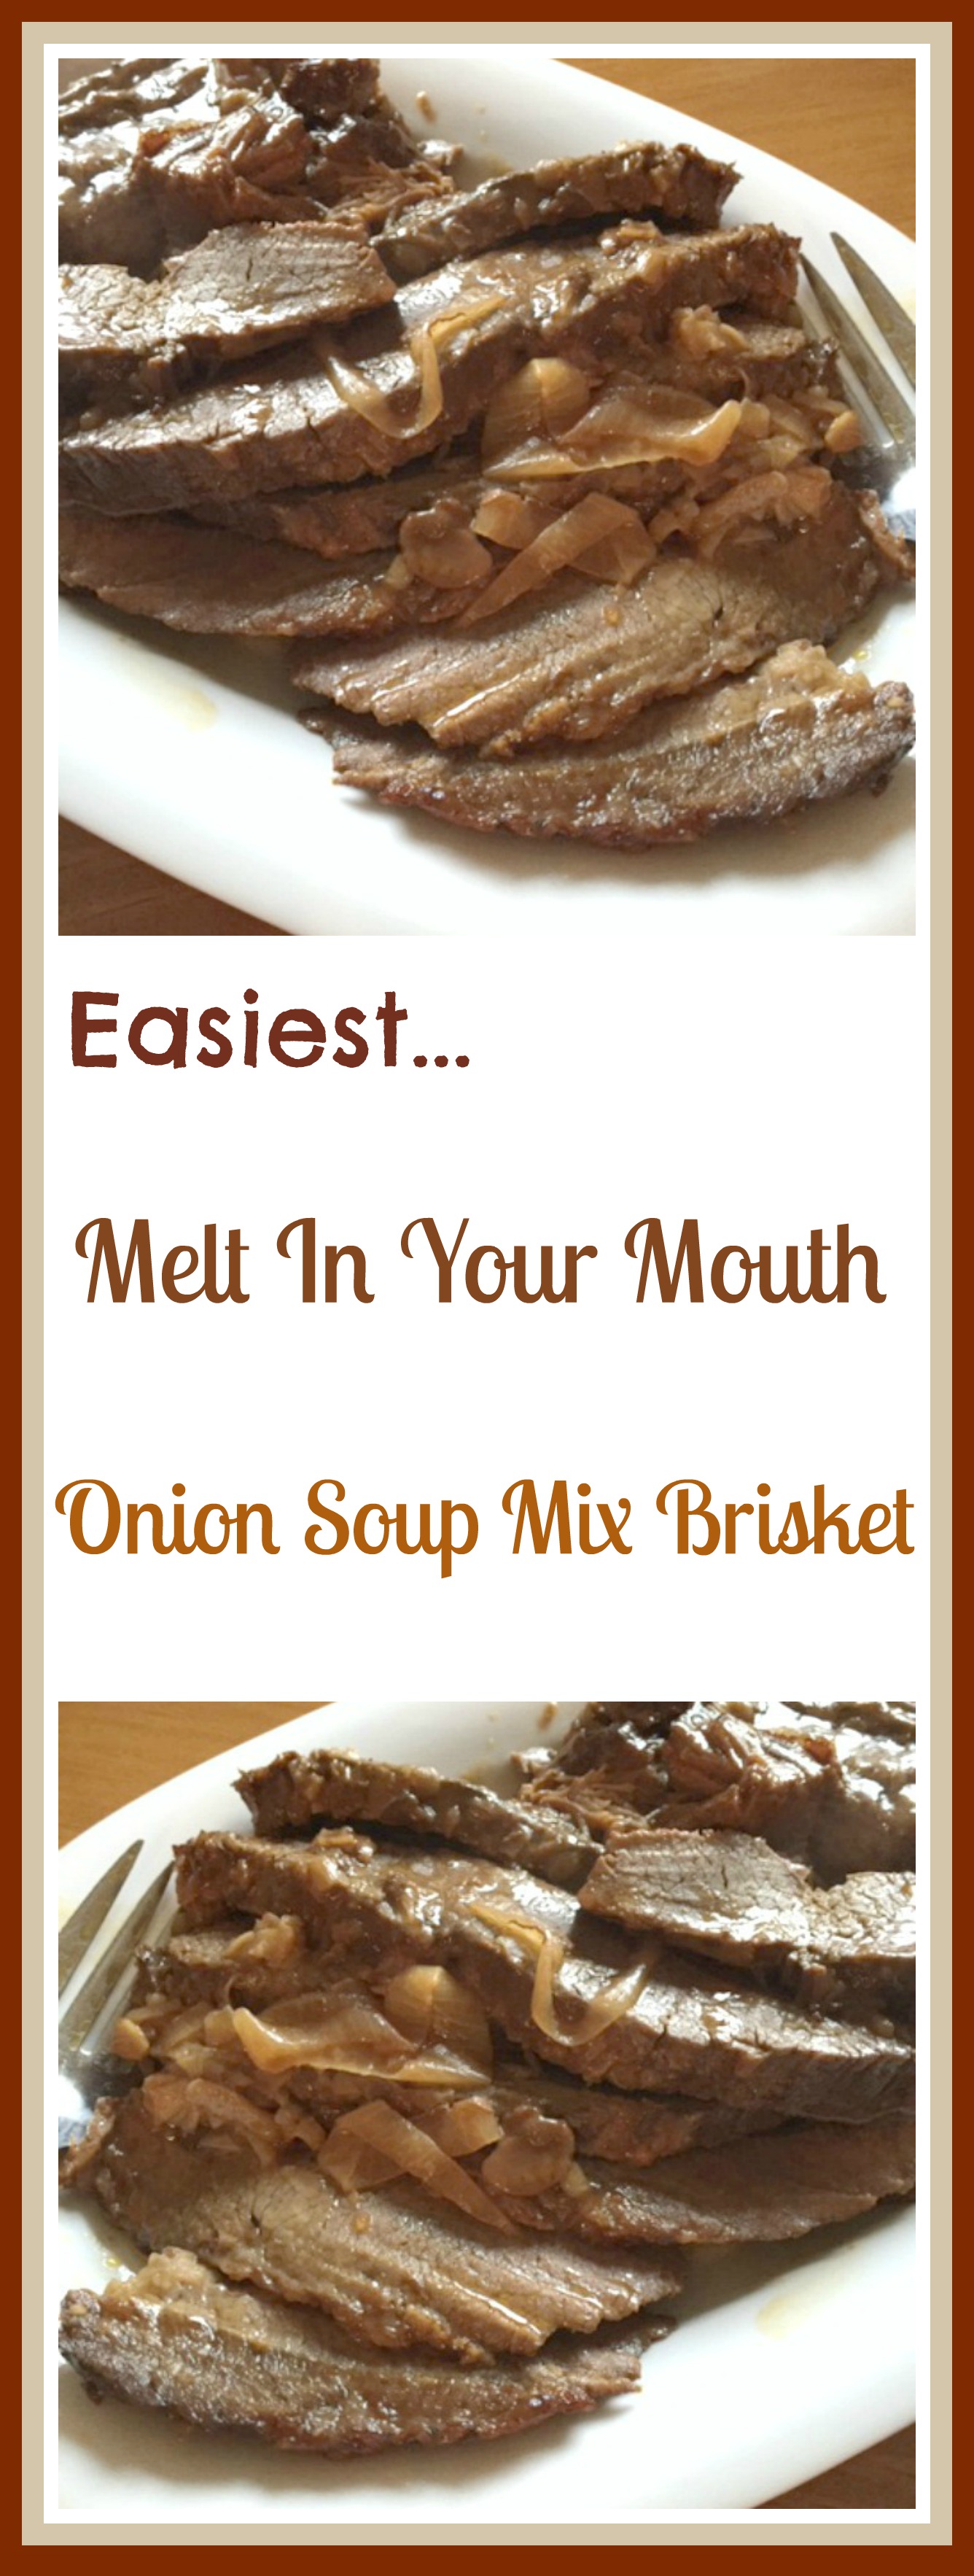 https://pamsdailydish.com/wp-content/uploads/2016/10/Easiest-Melt-In-Your-Mouth-Onion-Soup-Mix-Brisket.jpg